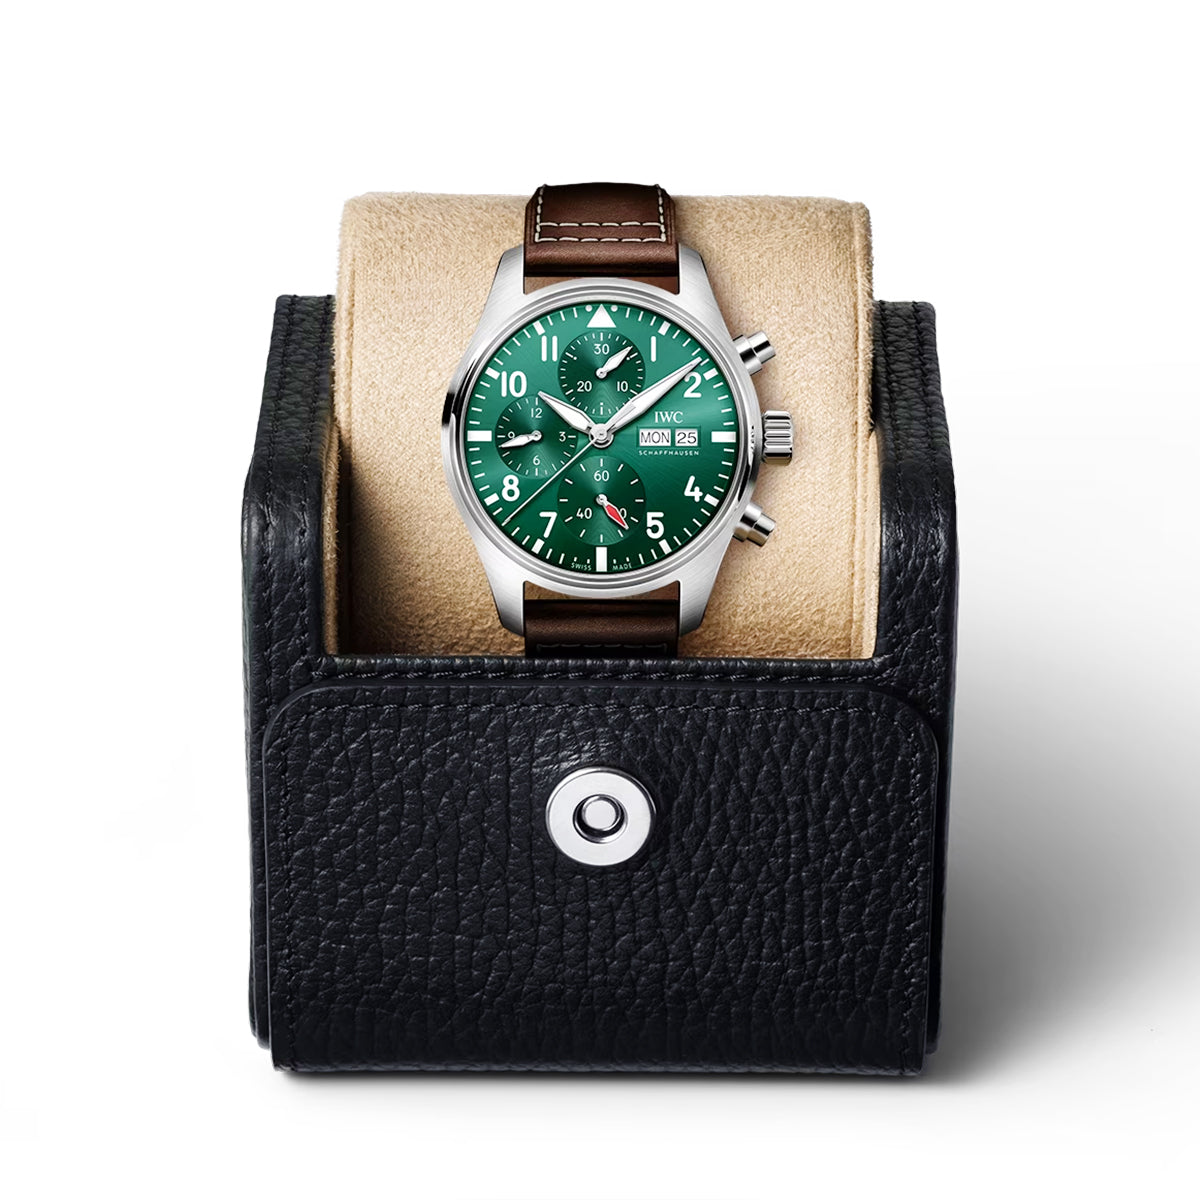 Pilot's 41mm Green Dial Chronograph Leather Strap Watch